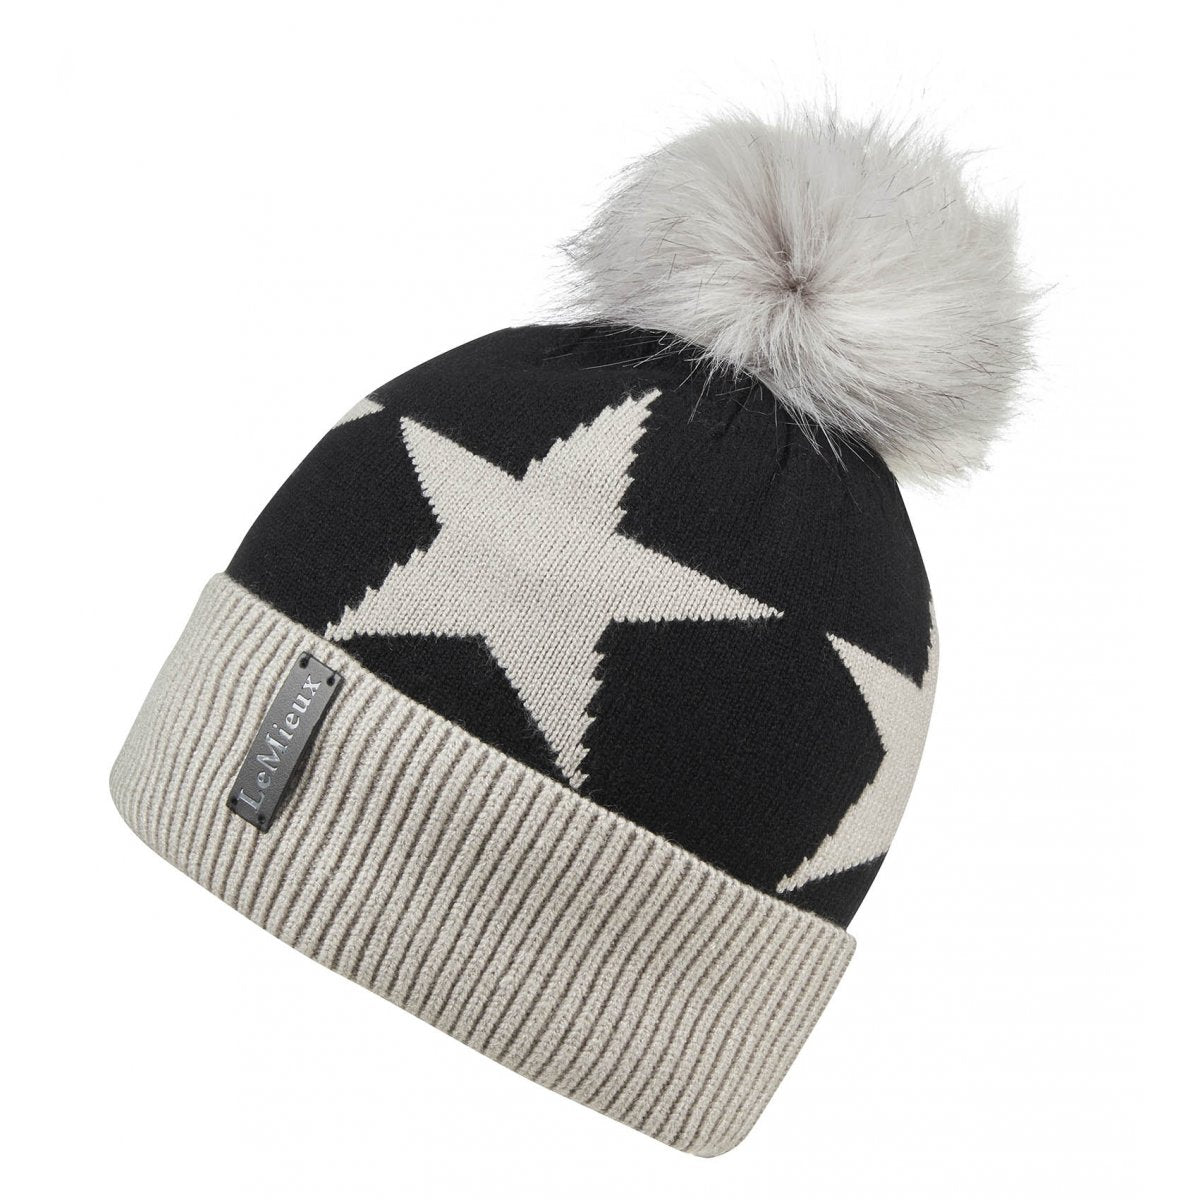 A Lemieux branded beanie with a large star pattern, beige cuff, and fluffy gray pom-pom on top.